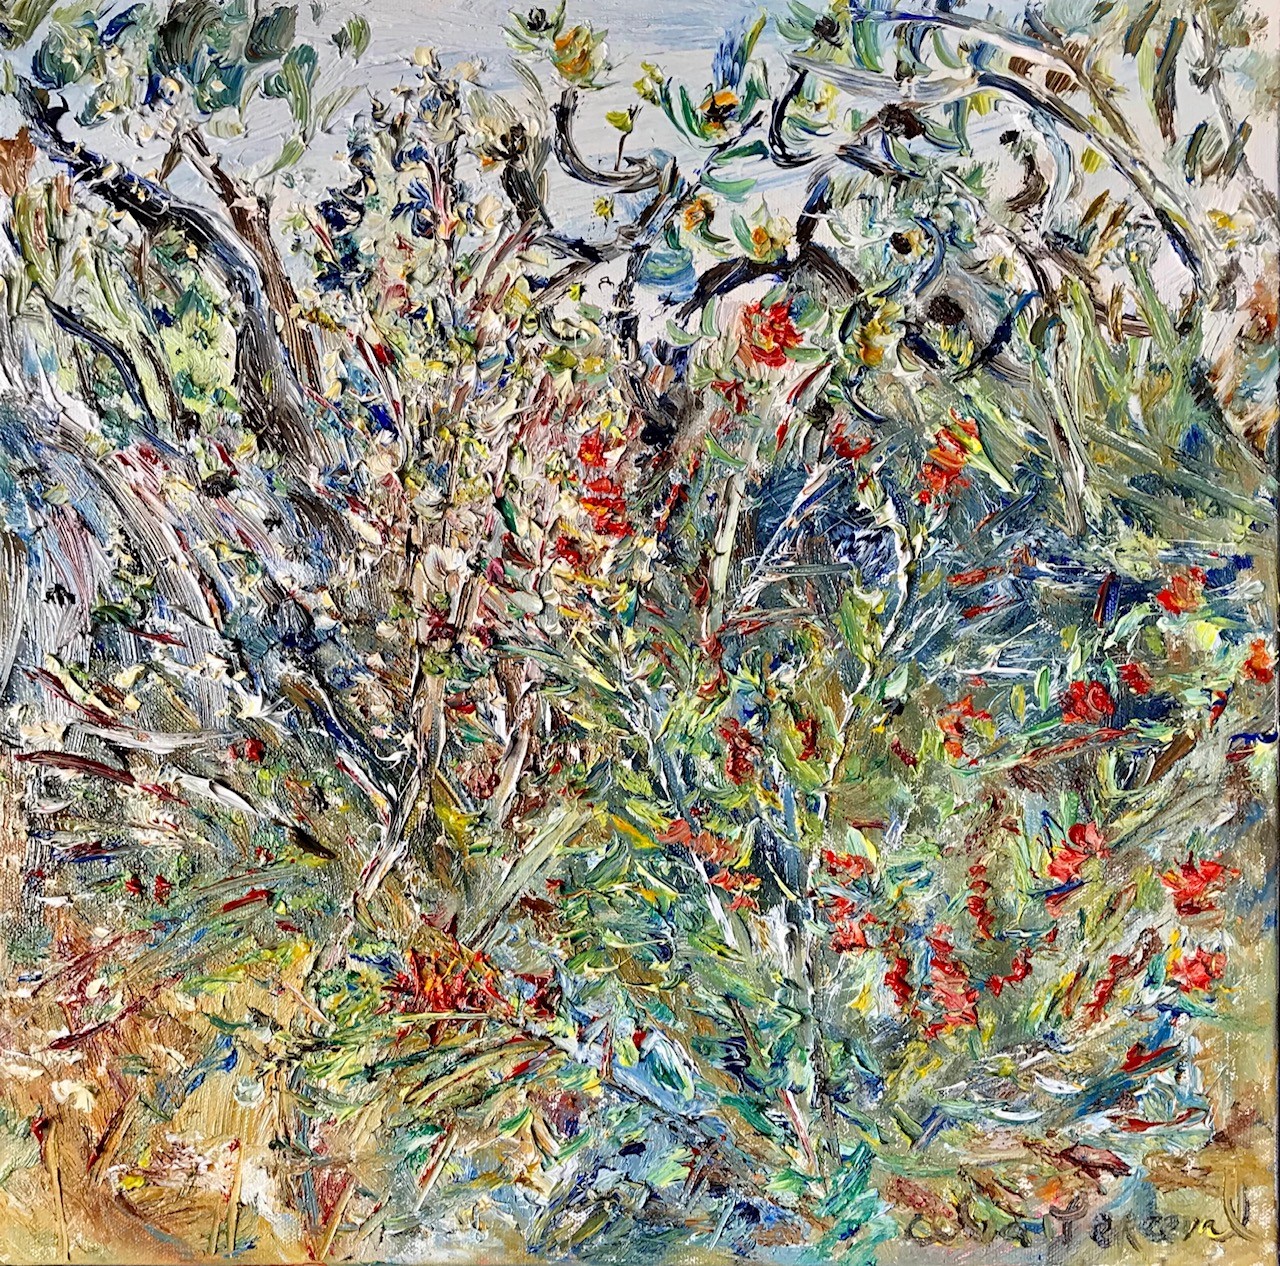 Perceval Bottlebrush and Banksia in the Wildflowers NSW Coastal Bushland oil on canvas 40 x40cm